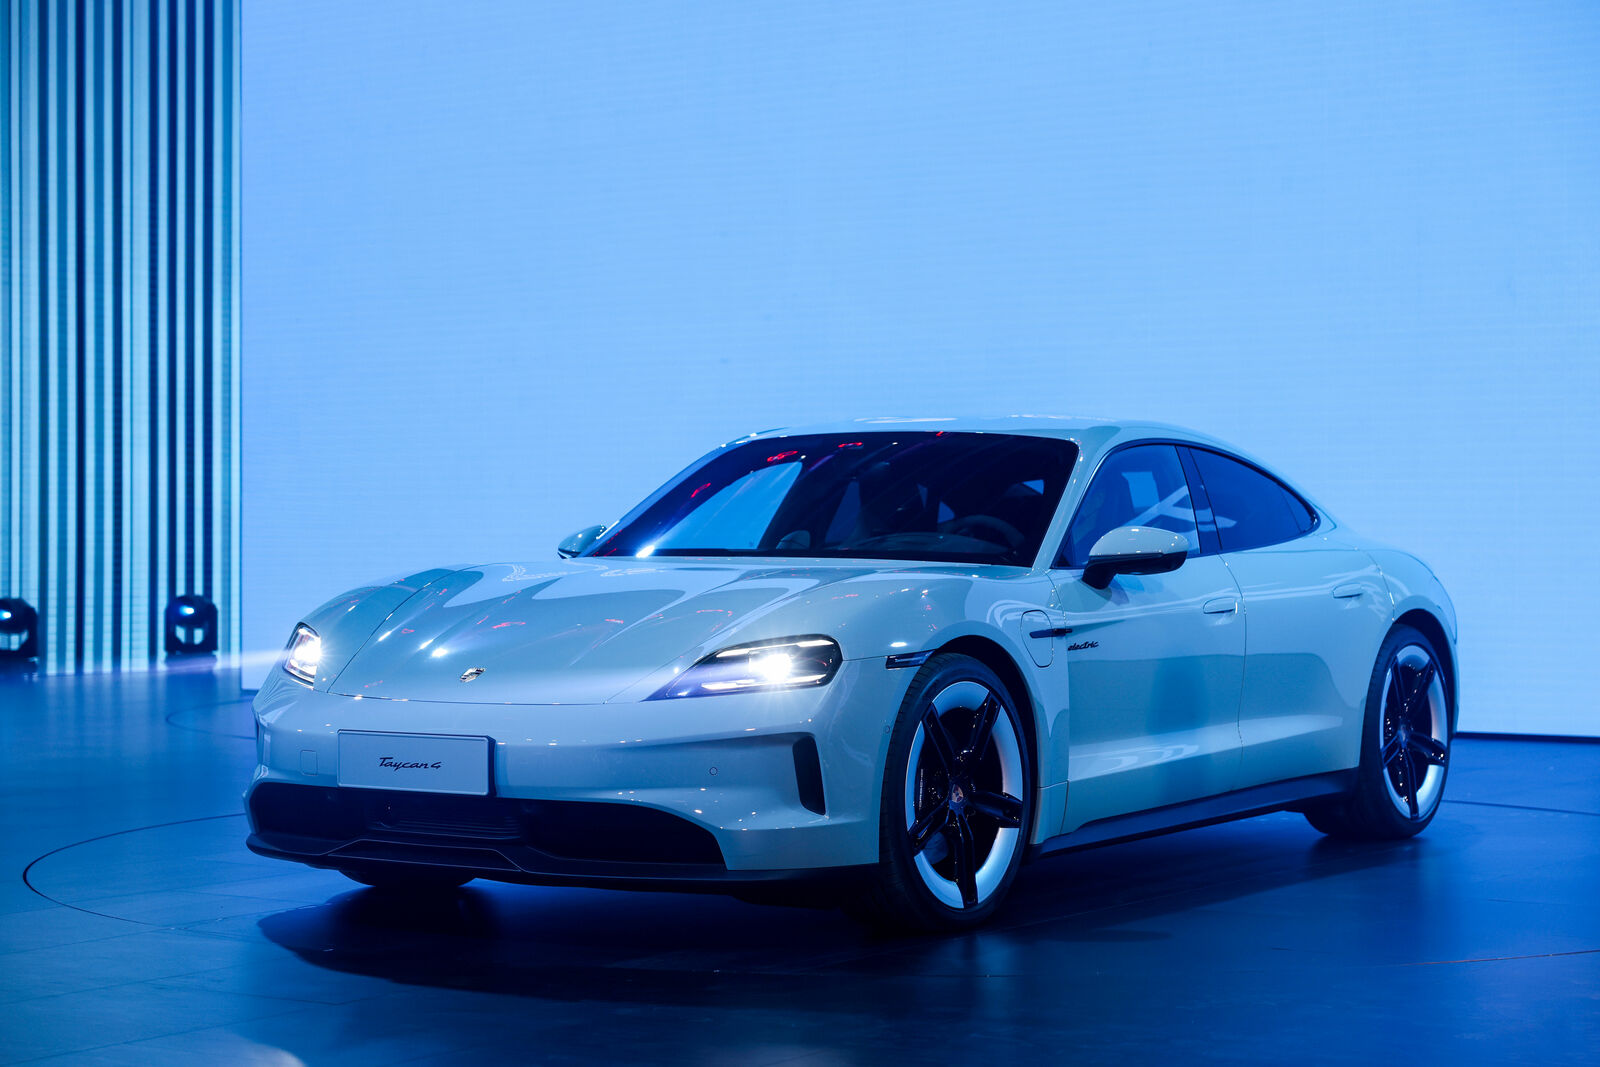 A sleek, white Porsche Taycan 4S is displayed in a brightly lit showroom with a futuristic blue background.